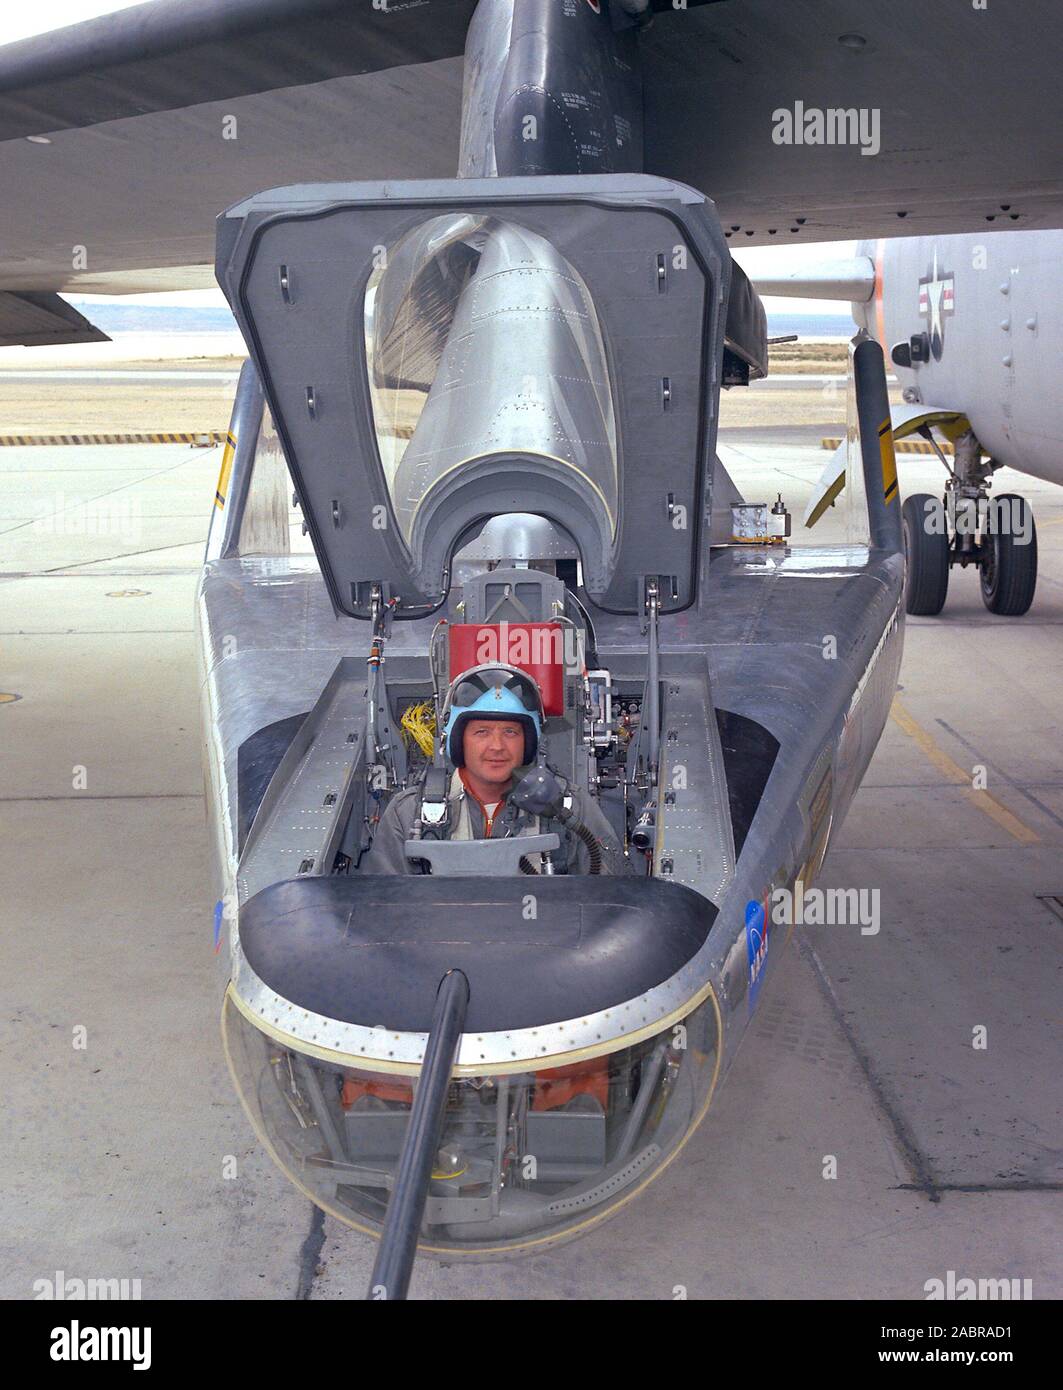 NASA research pilot Milt Thompson sits in the M2-F2 'heavyweight' lifting body research vehicle before a 1966 test flight. The M2-F2 and the other lifting-body designs were all attached to a wing pylon on NASA’s B-52 mothership and carried aloft. The vehicles were then drop-launched and, at the end of their flights, glided back to wheeled landings on the dry lake or runway at Edwards AFB. The lifting body designs influenced the design of the Space Shuttle and were also reincarnated in the design of the X-38 in the 1990s. Stock Photo